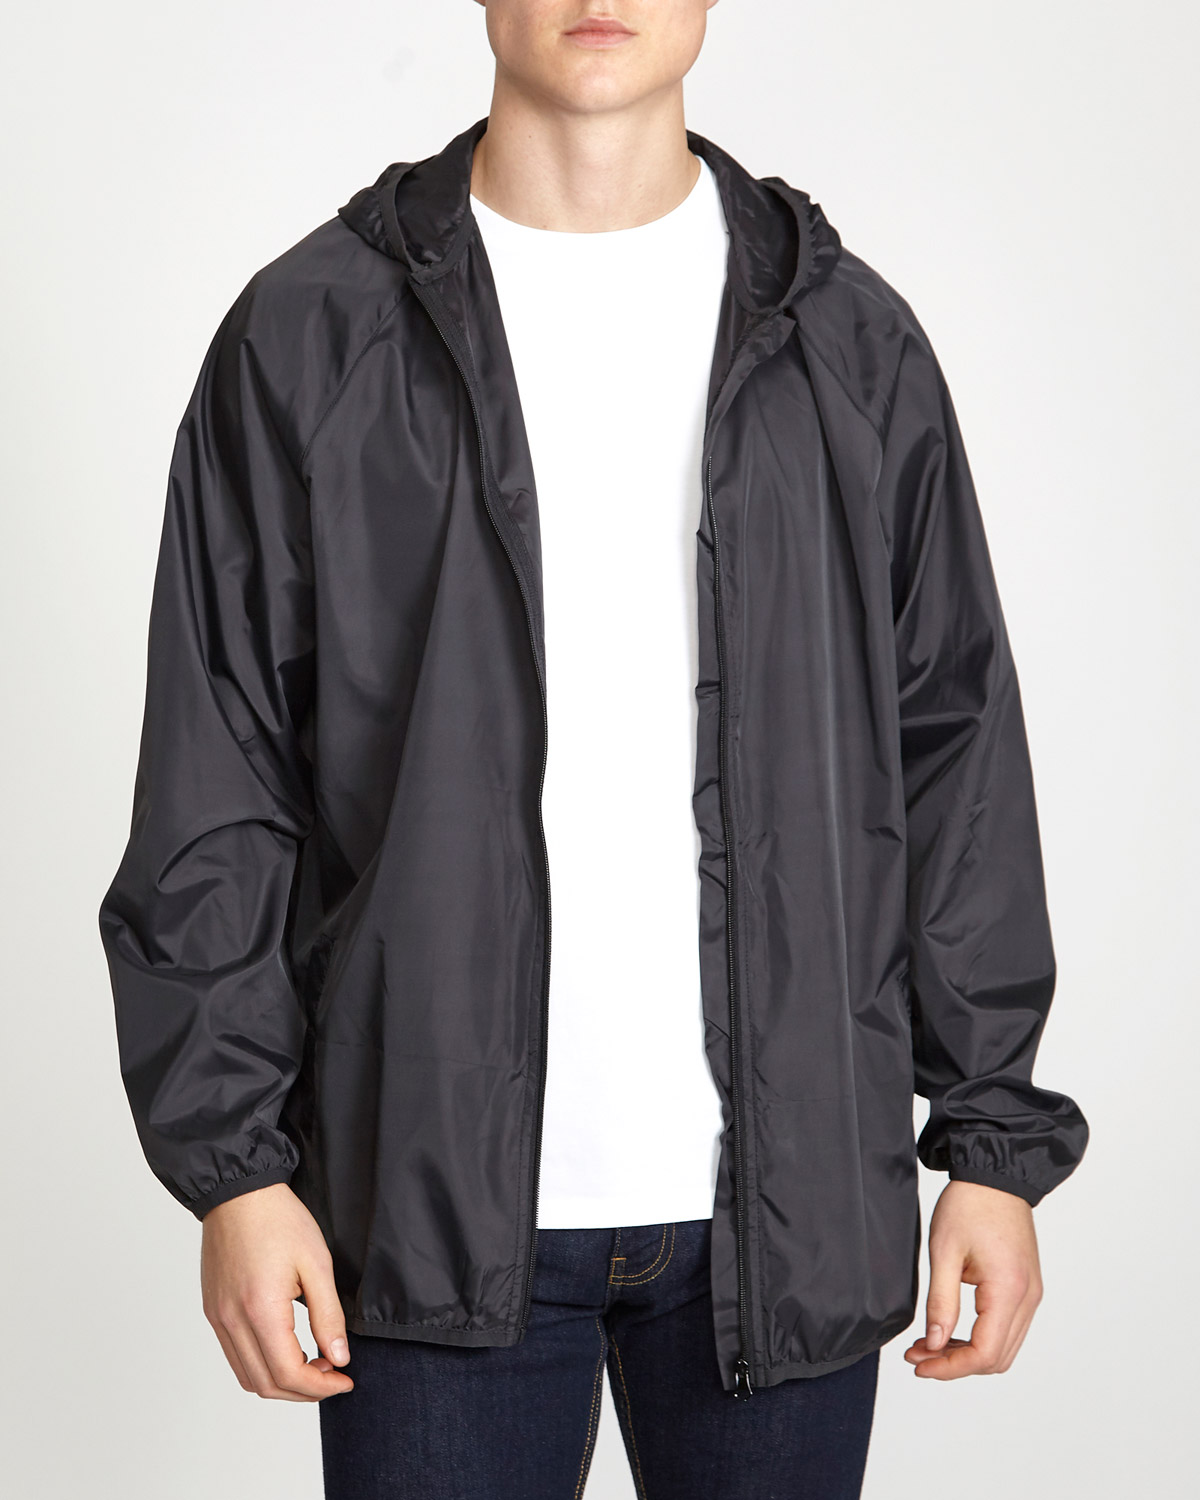 Dunnes Stores | Black Rain Jacket In A Bag